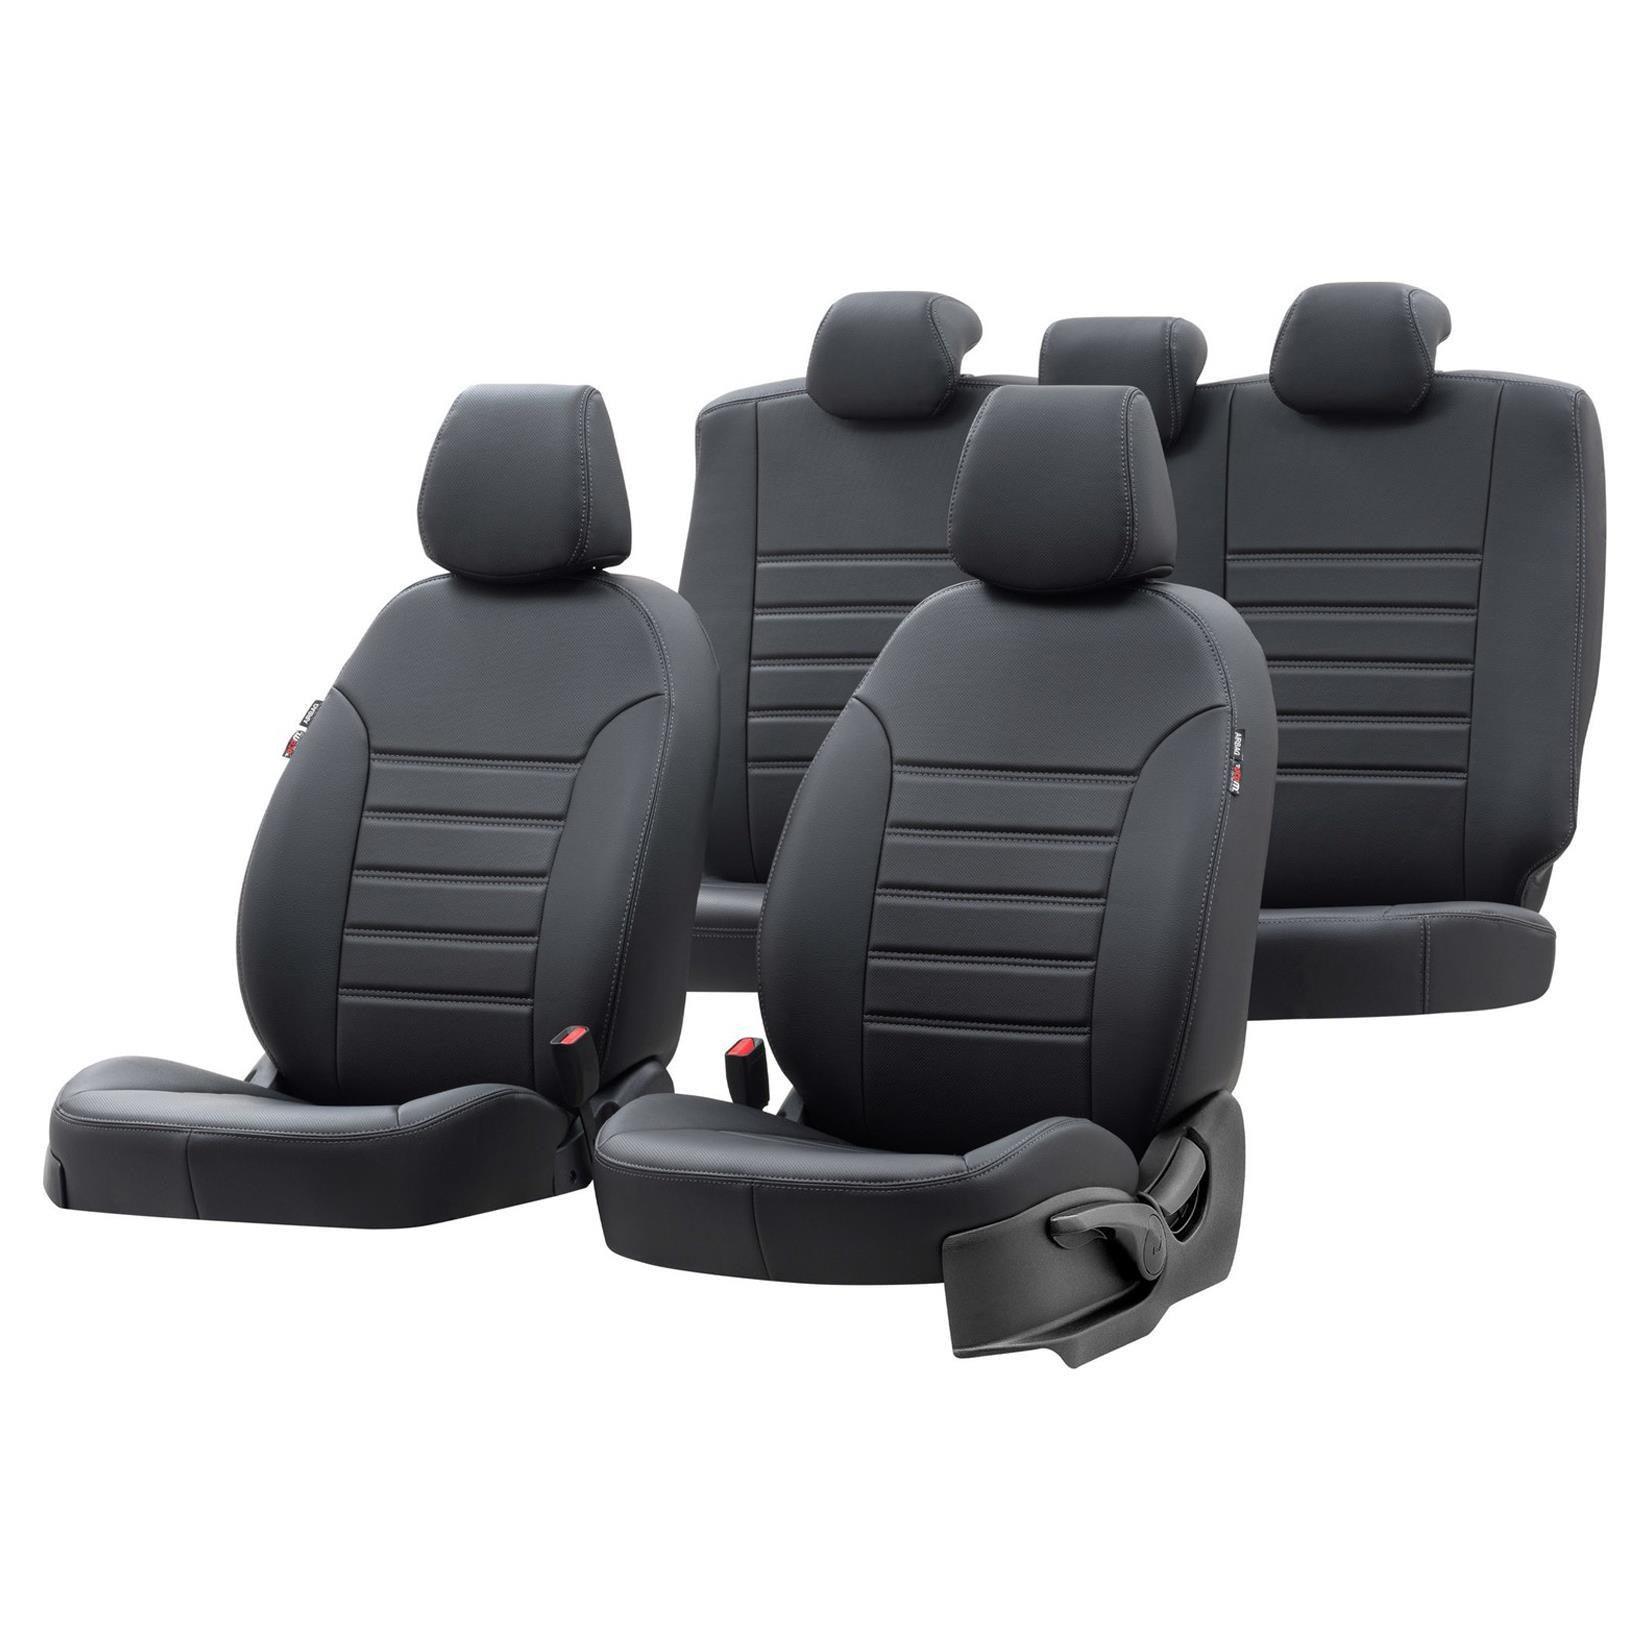 FORD RANGER T6 2012-2022 DOUBLE CAB FRONT AND REAR SEAT COVERS - PU LEATHER IN BLACK - Storm Xccessories2